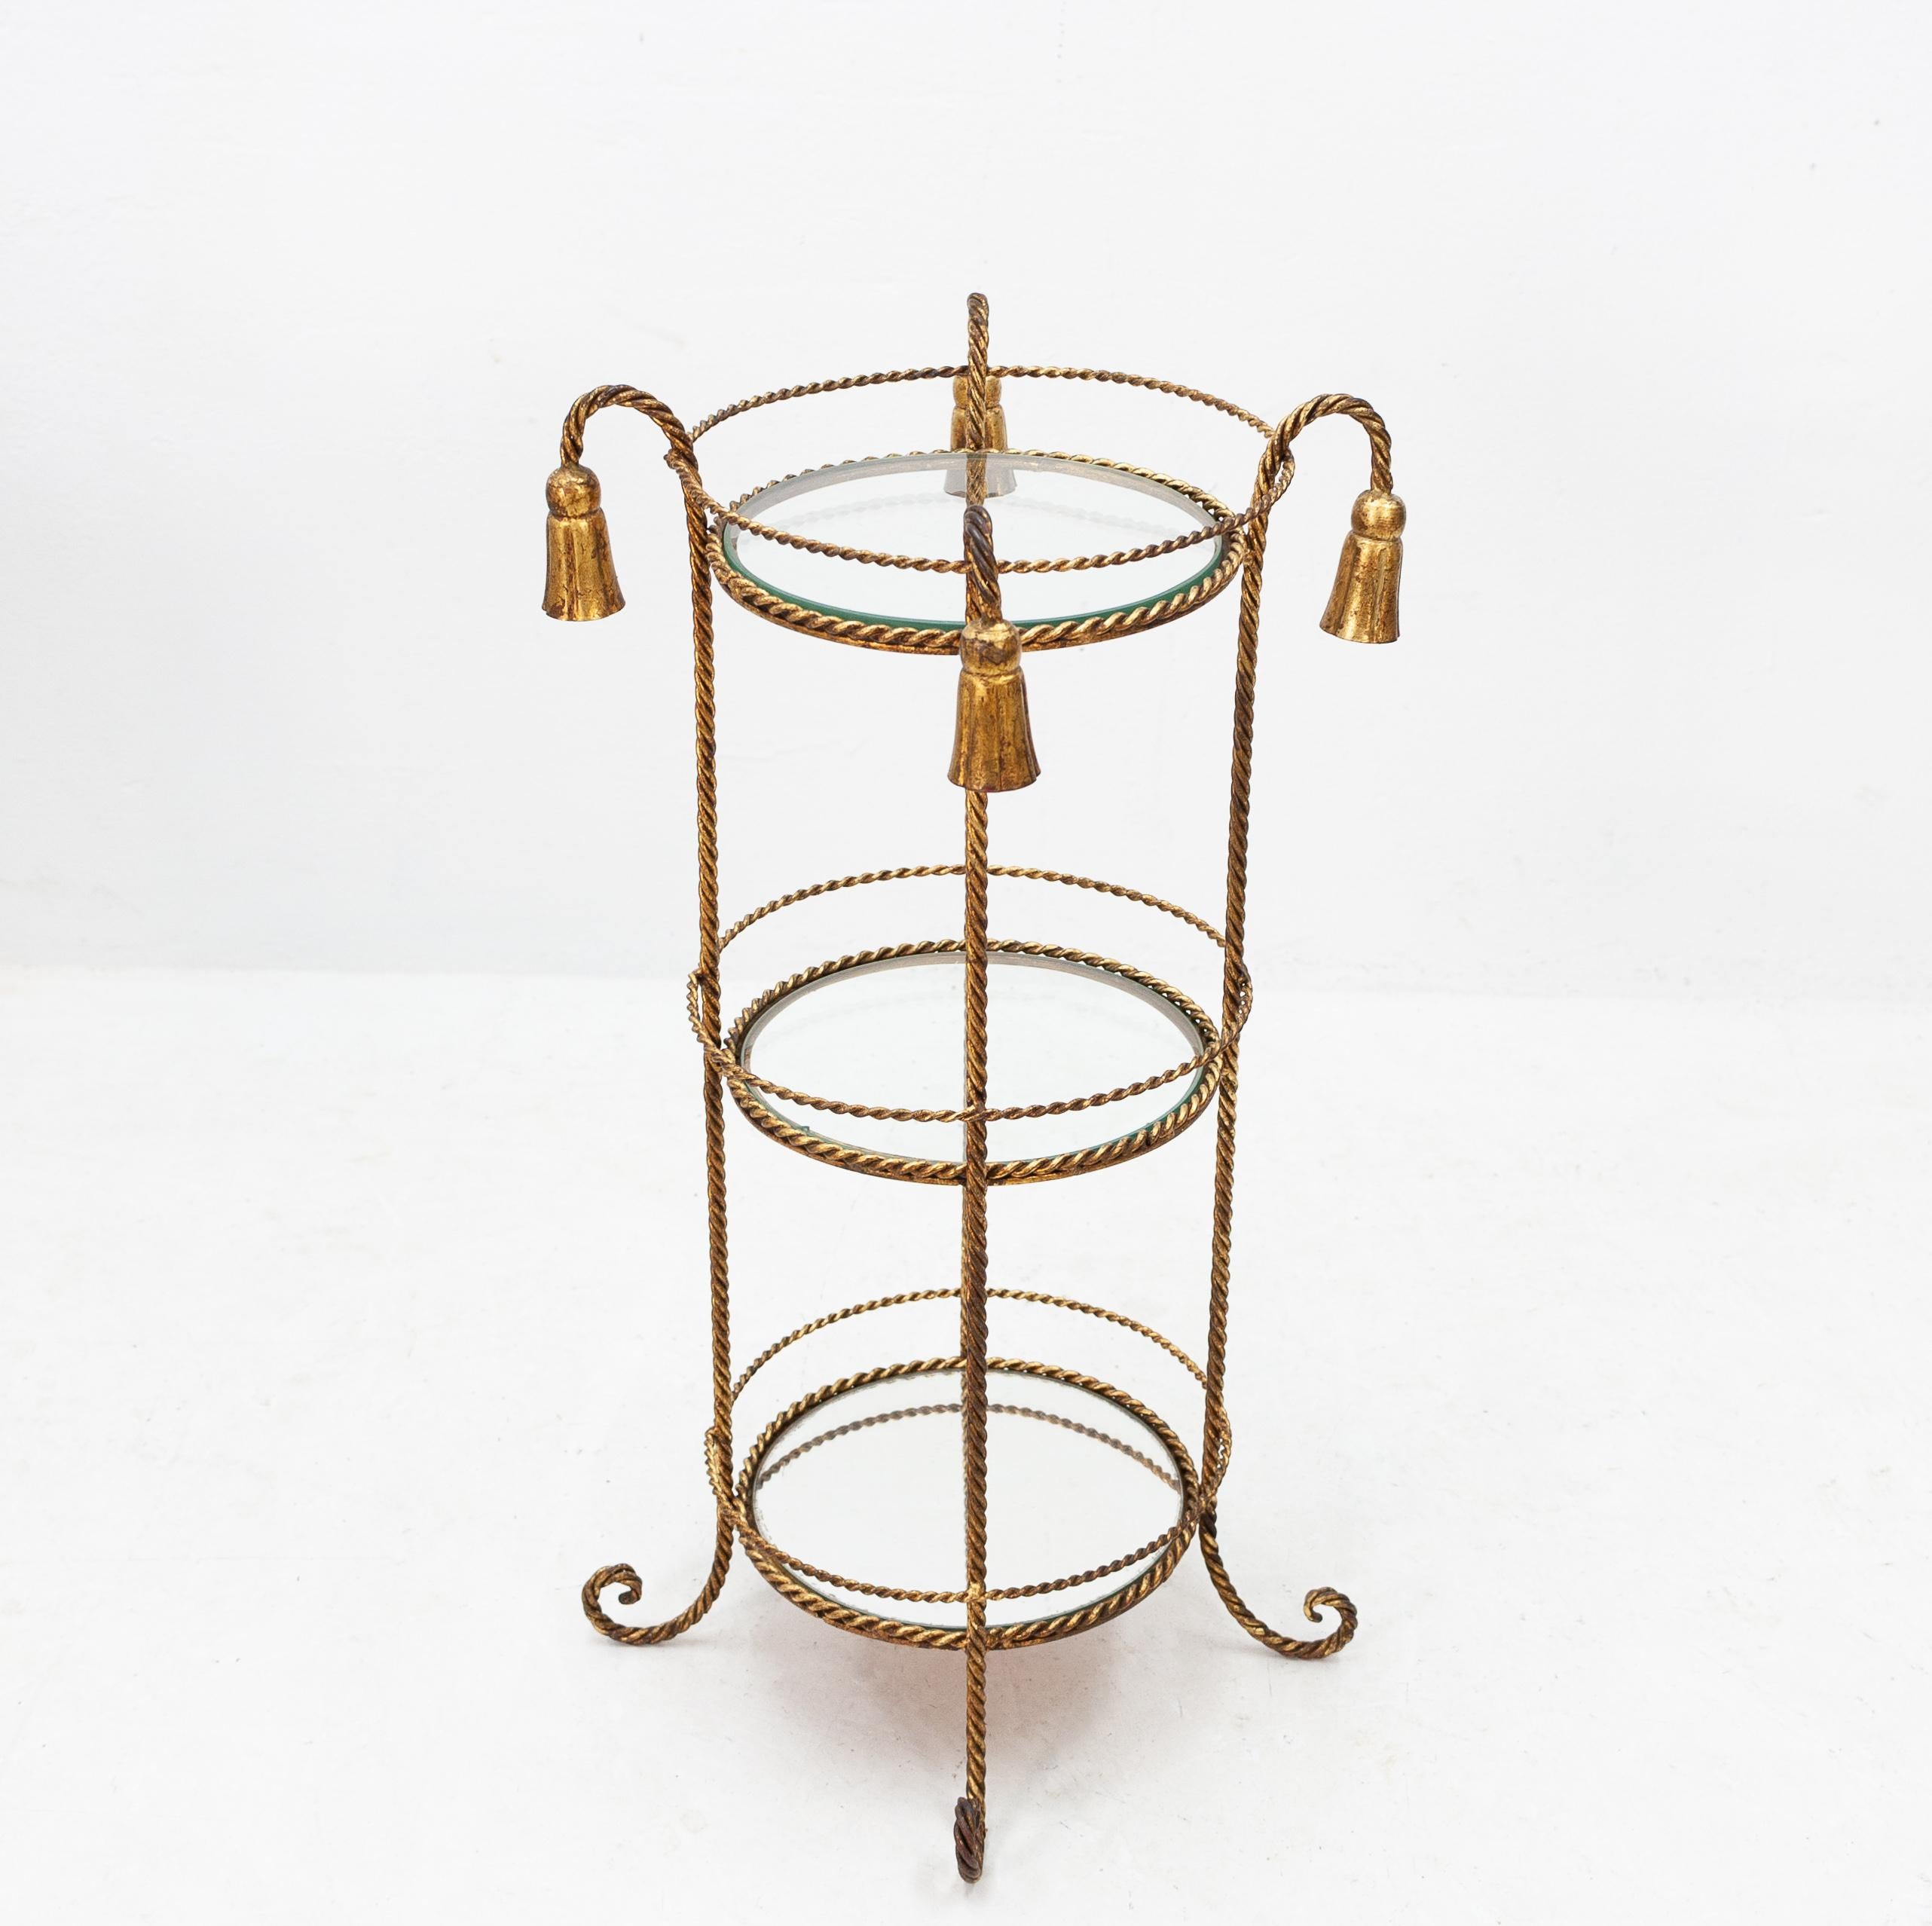 Italian gild metal occasional table. Lovely small table. Comes with still there original gilding
A warm antique gold color. With two glass tops .and a mirror at the last top.